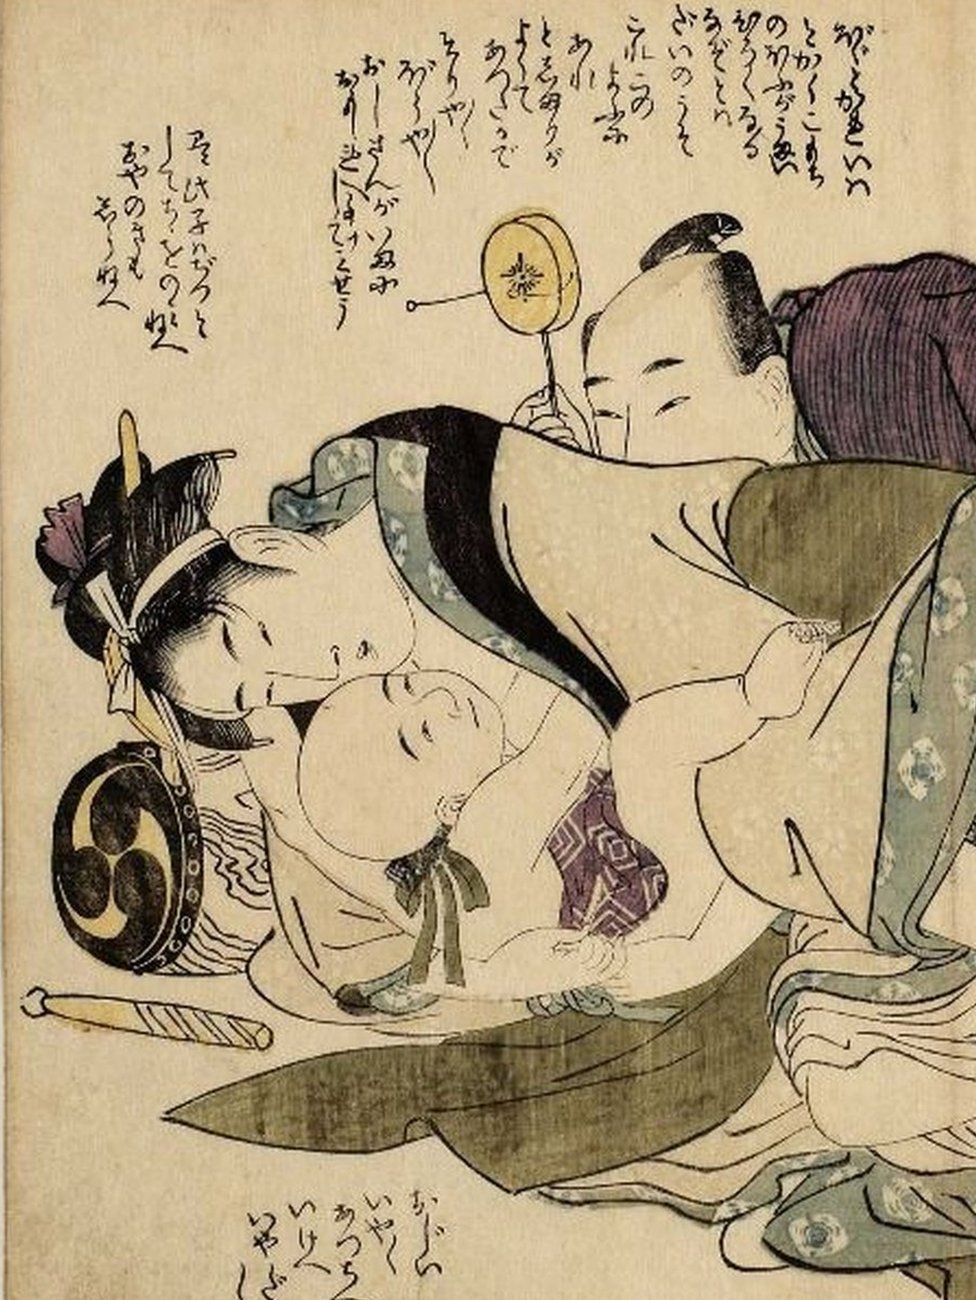 Shunga from Ehon Toko no Ume (Picture book: Plums in Bed) by Kitagawa Utamaro, Courtesy of the International Center for Japanese Studies.